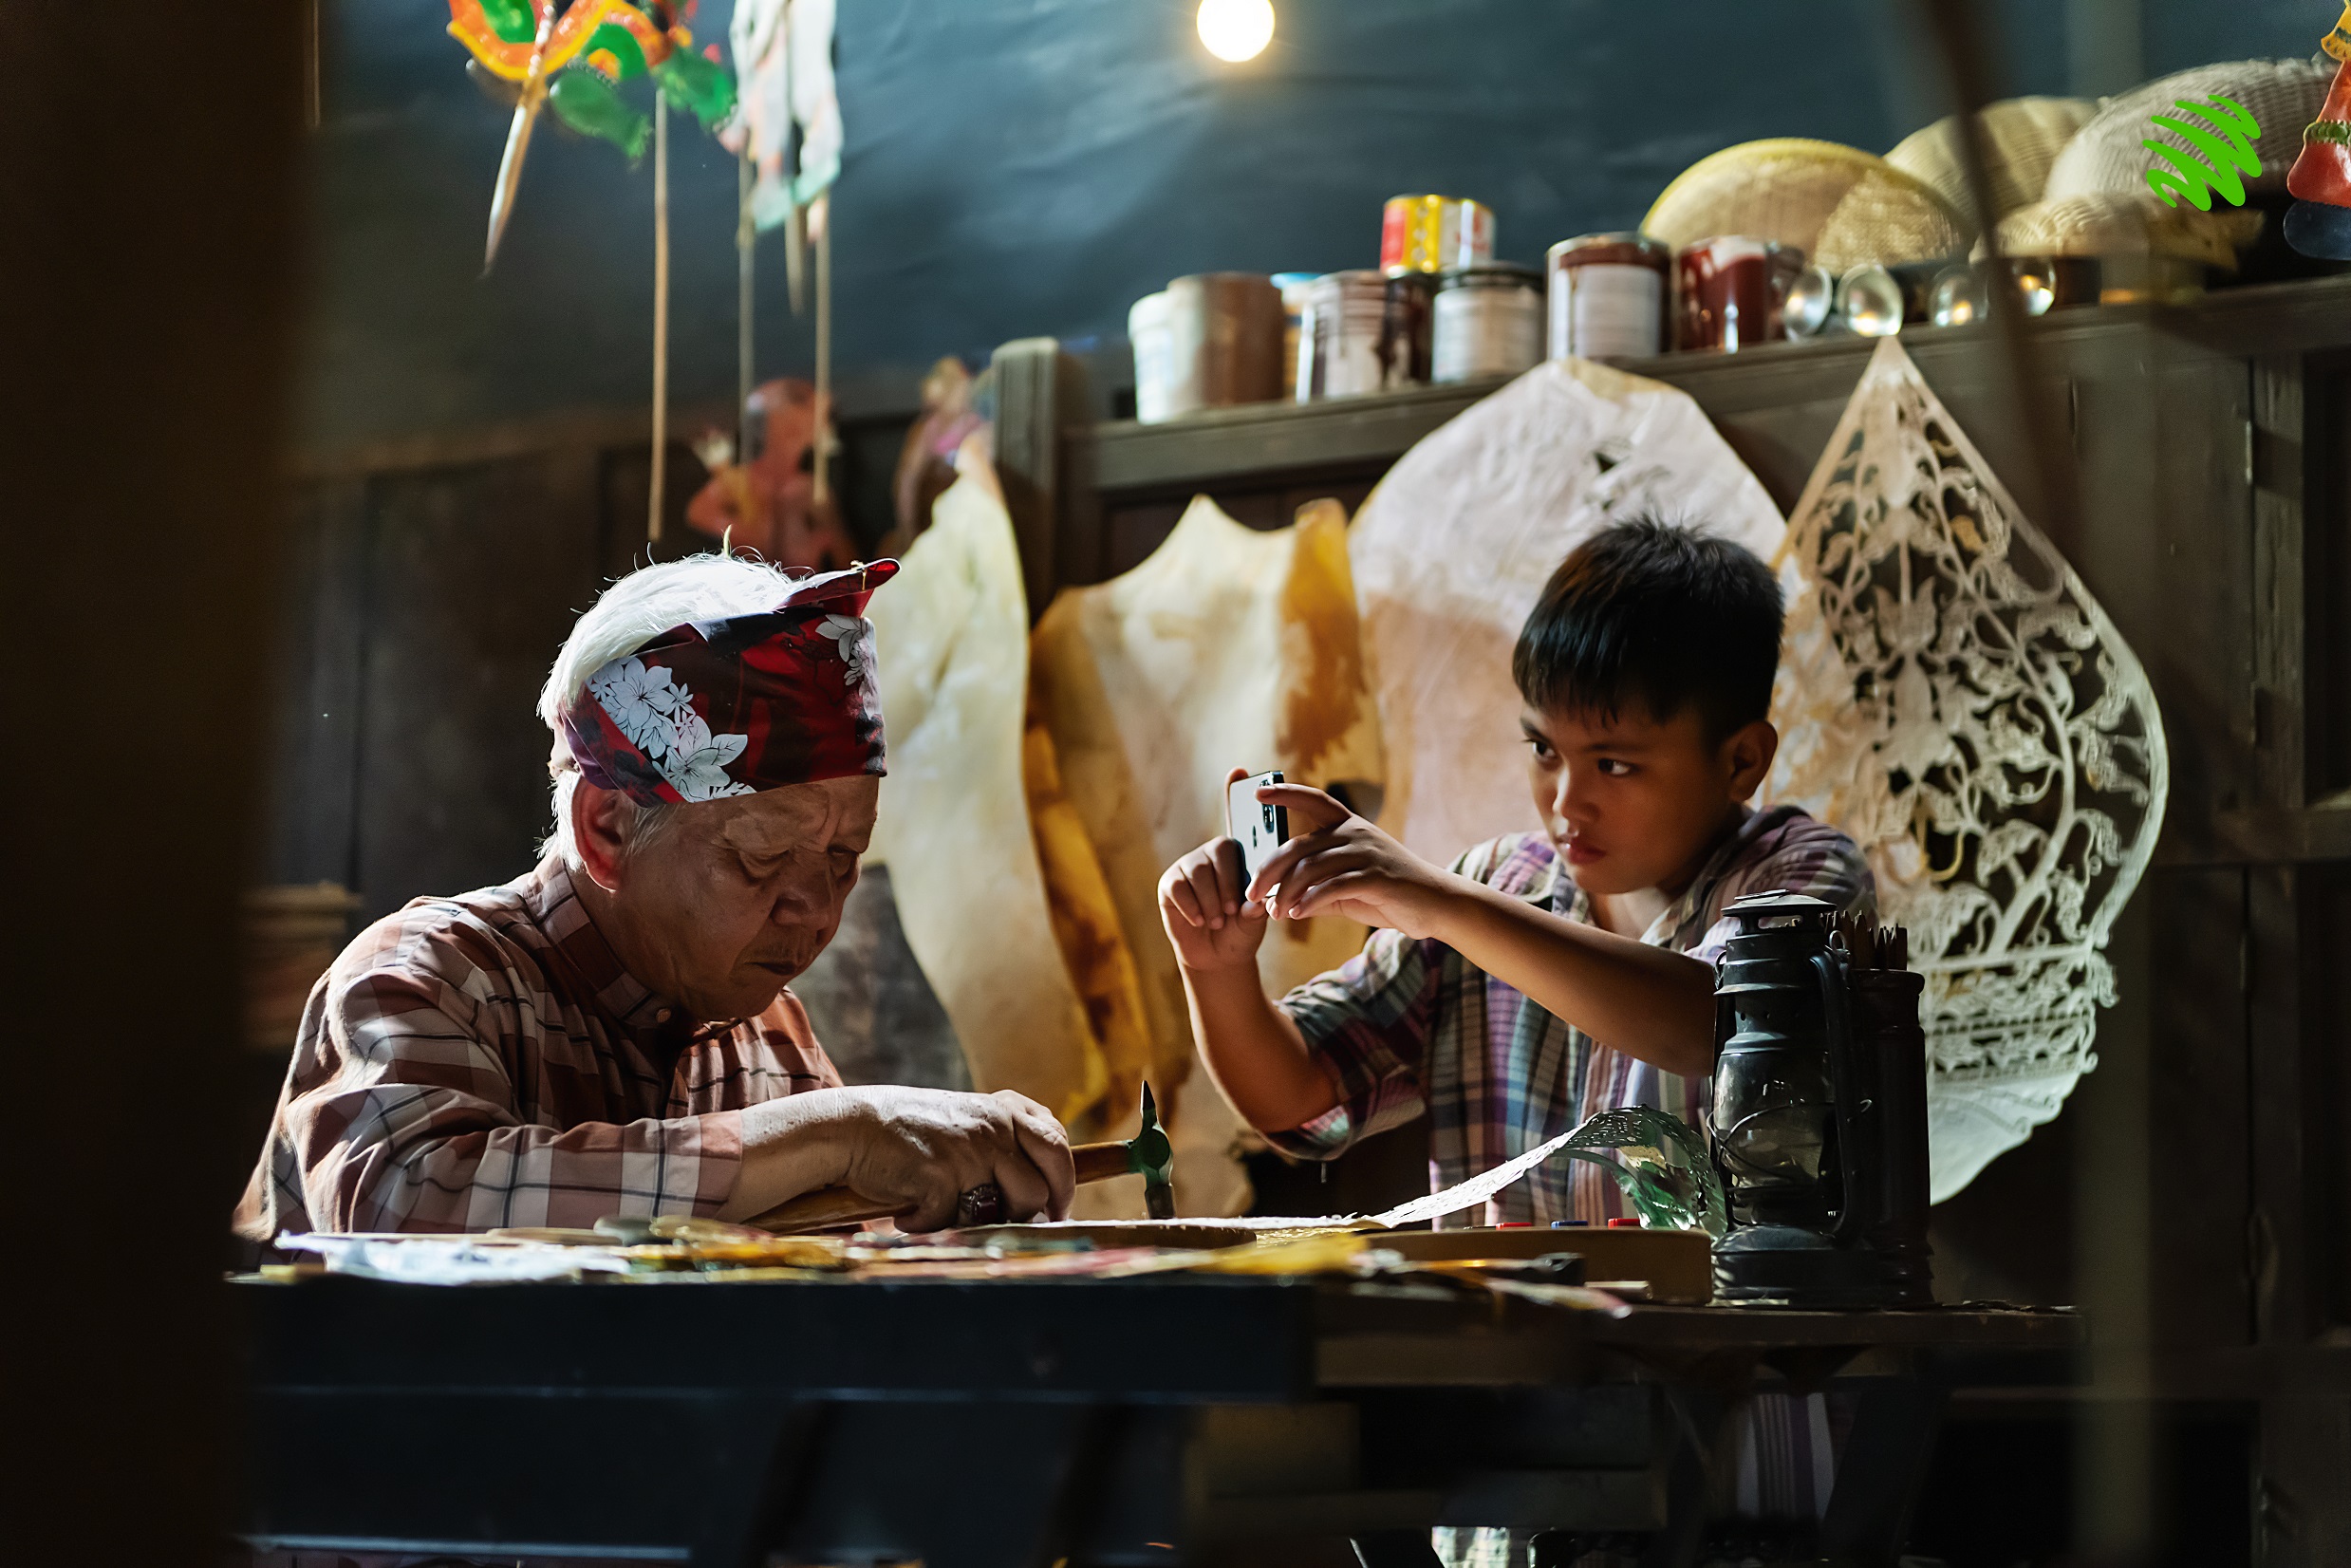 Maxis unveils film capturing traditional art through the power of its network and iPhone 12 Pro